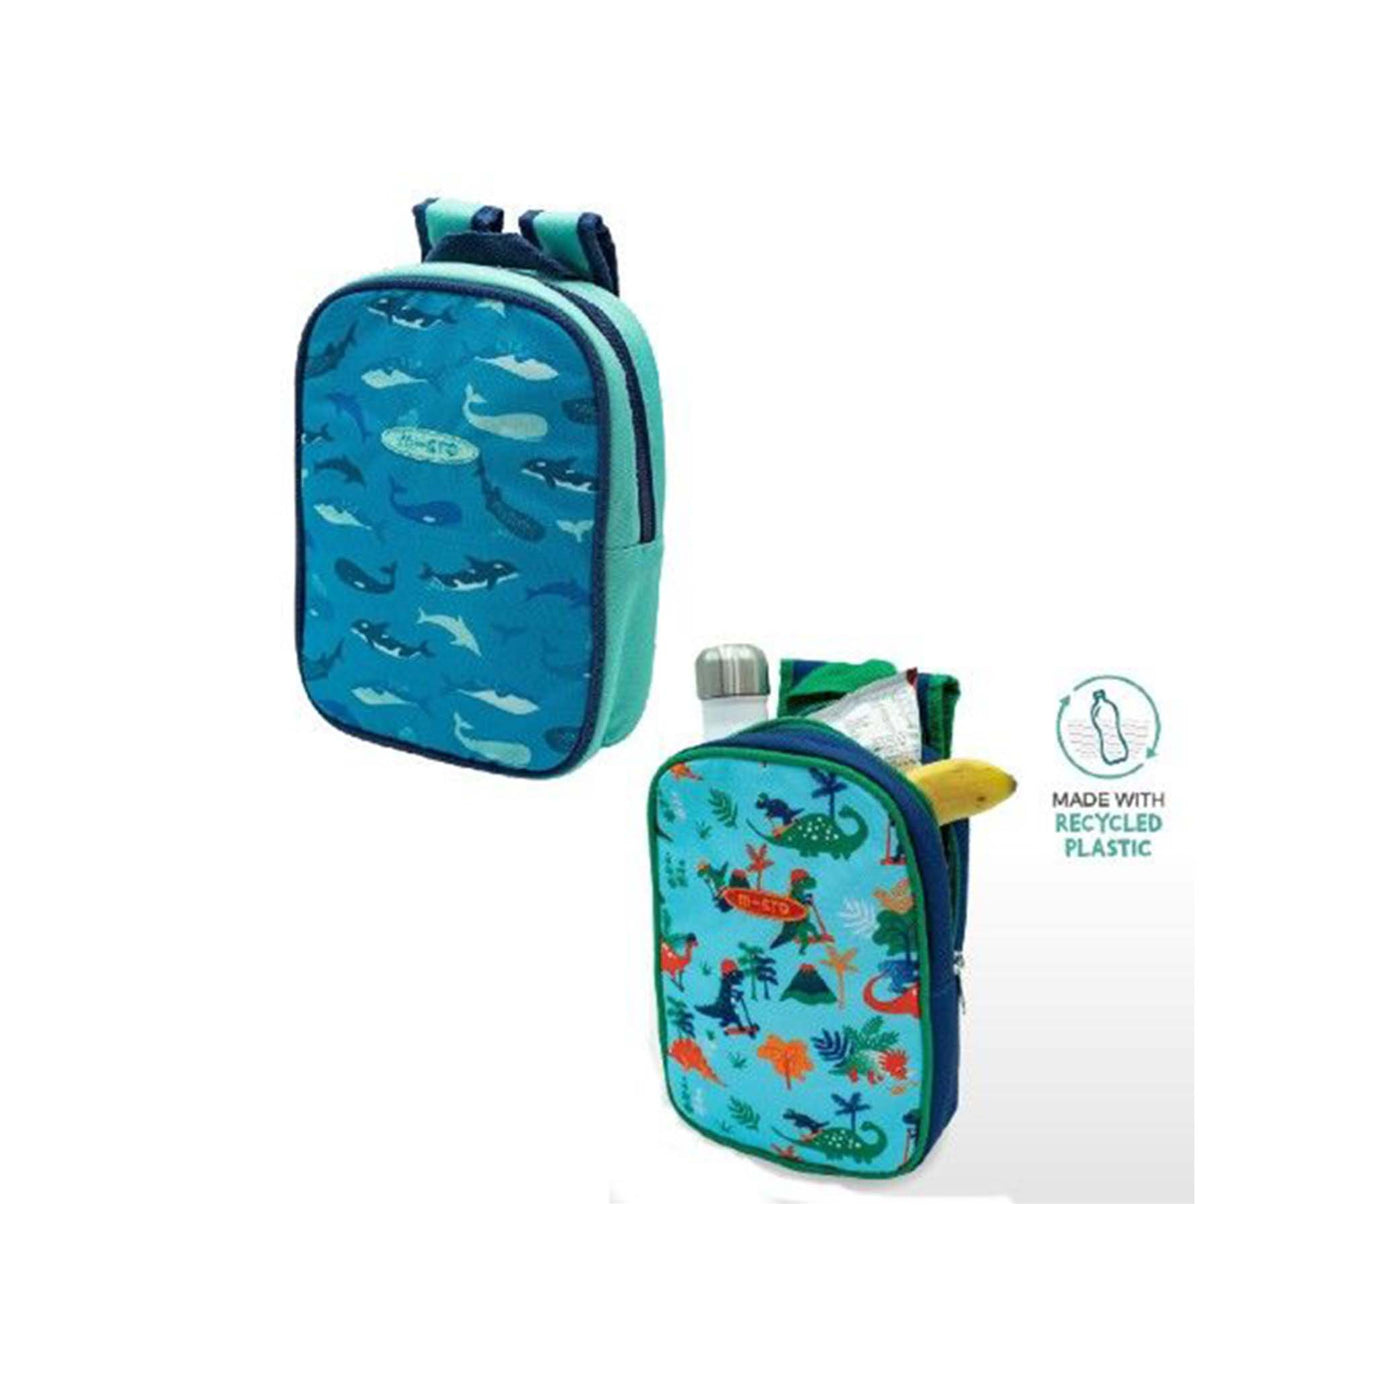 Microscooter lunch bags made from recycled plastic. Left bag: Sealife design. Right bag: Dinosaur design. 